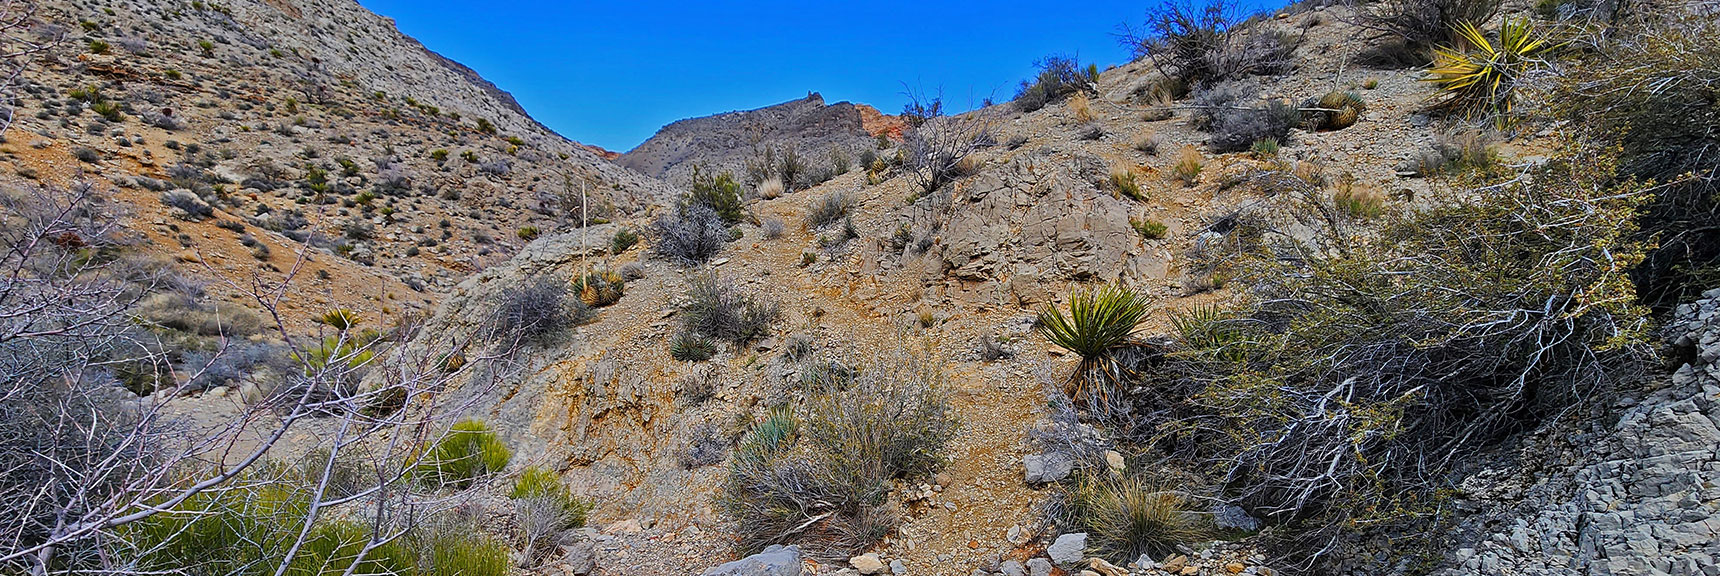 Right Turn to Skirt the Upper Ridgeline to Pink Goblin Pass Without Descending To Gateway Canyon | Ash Canyon to Calico Tanks | Calico Basin and Red Rock Canyon, Nevada | David Smith | Las Vegas Area Trails